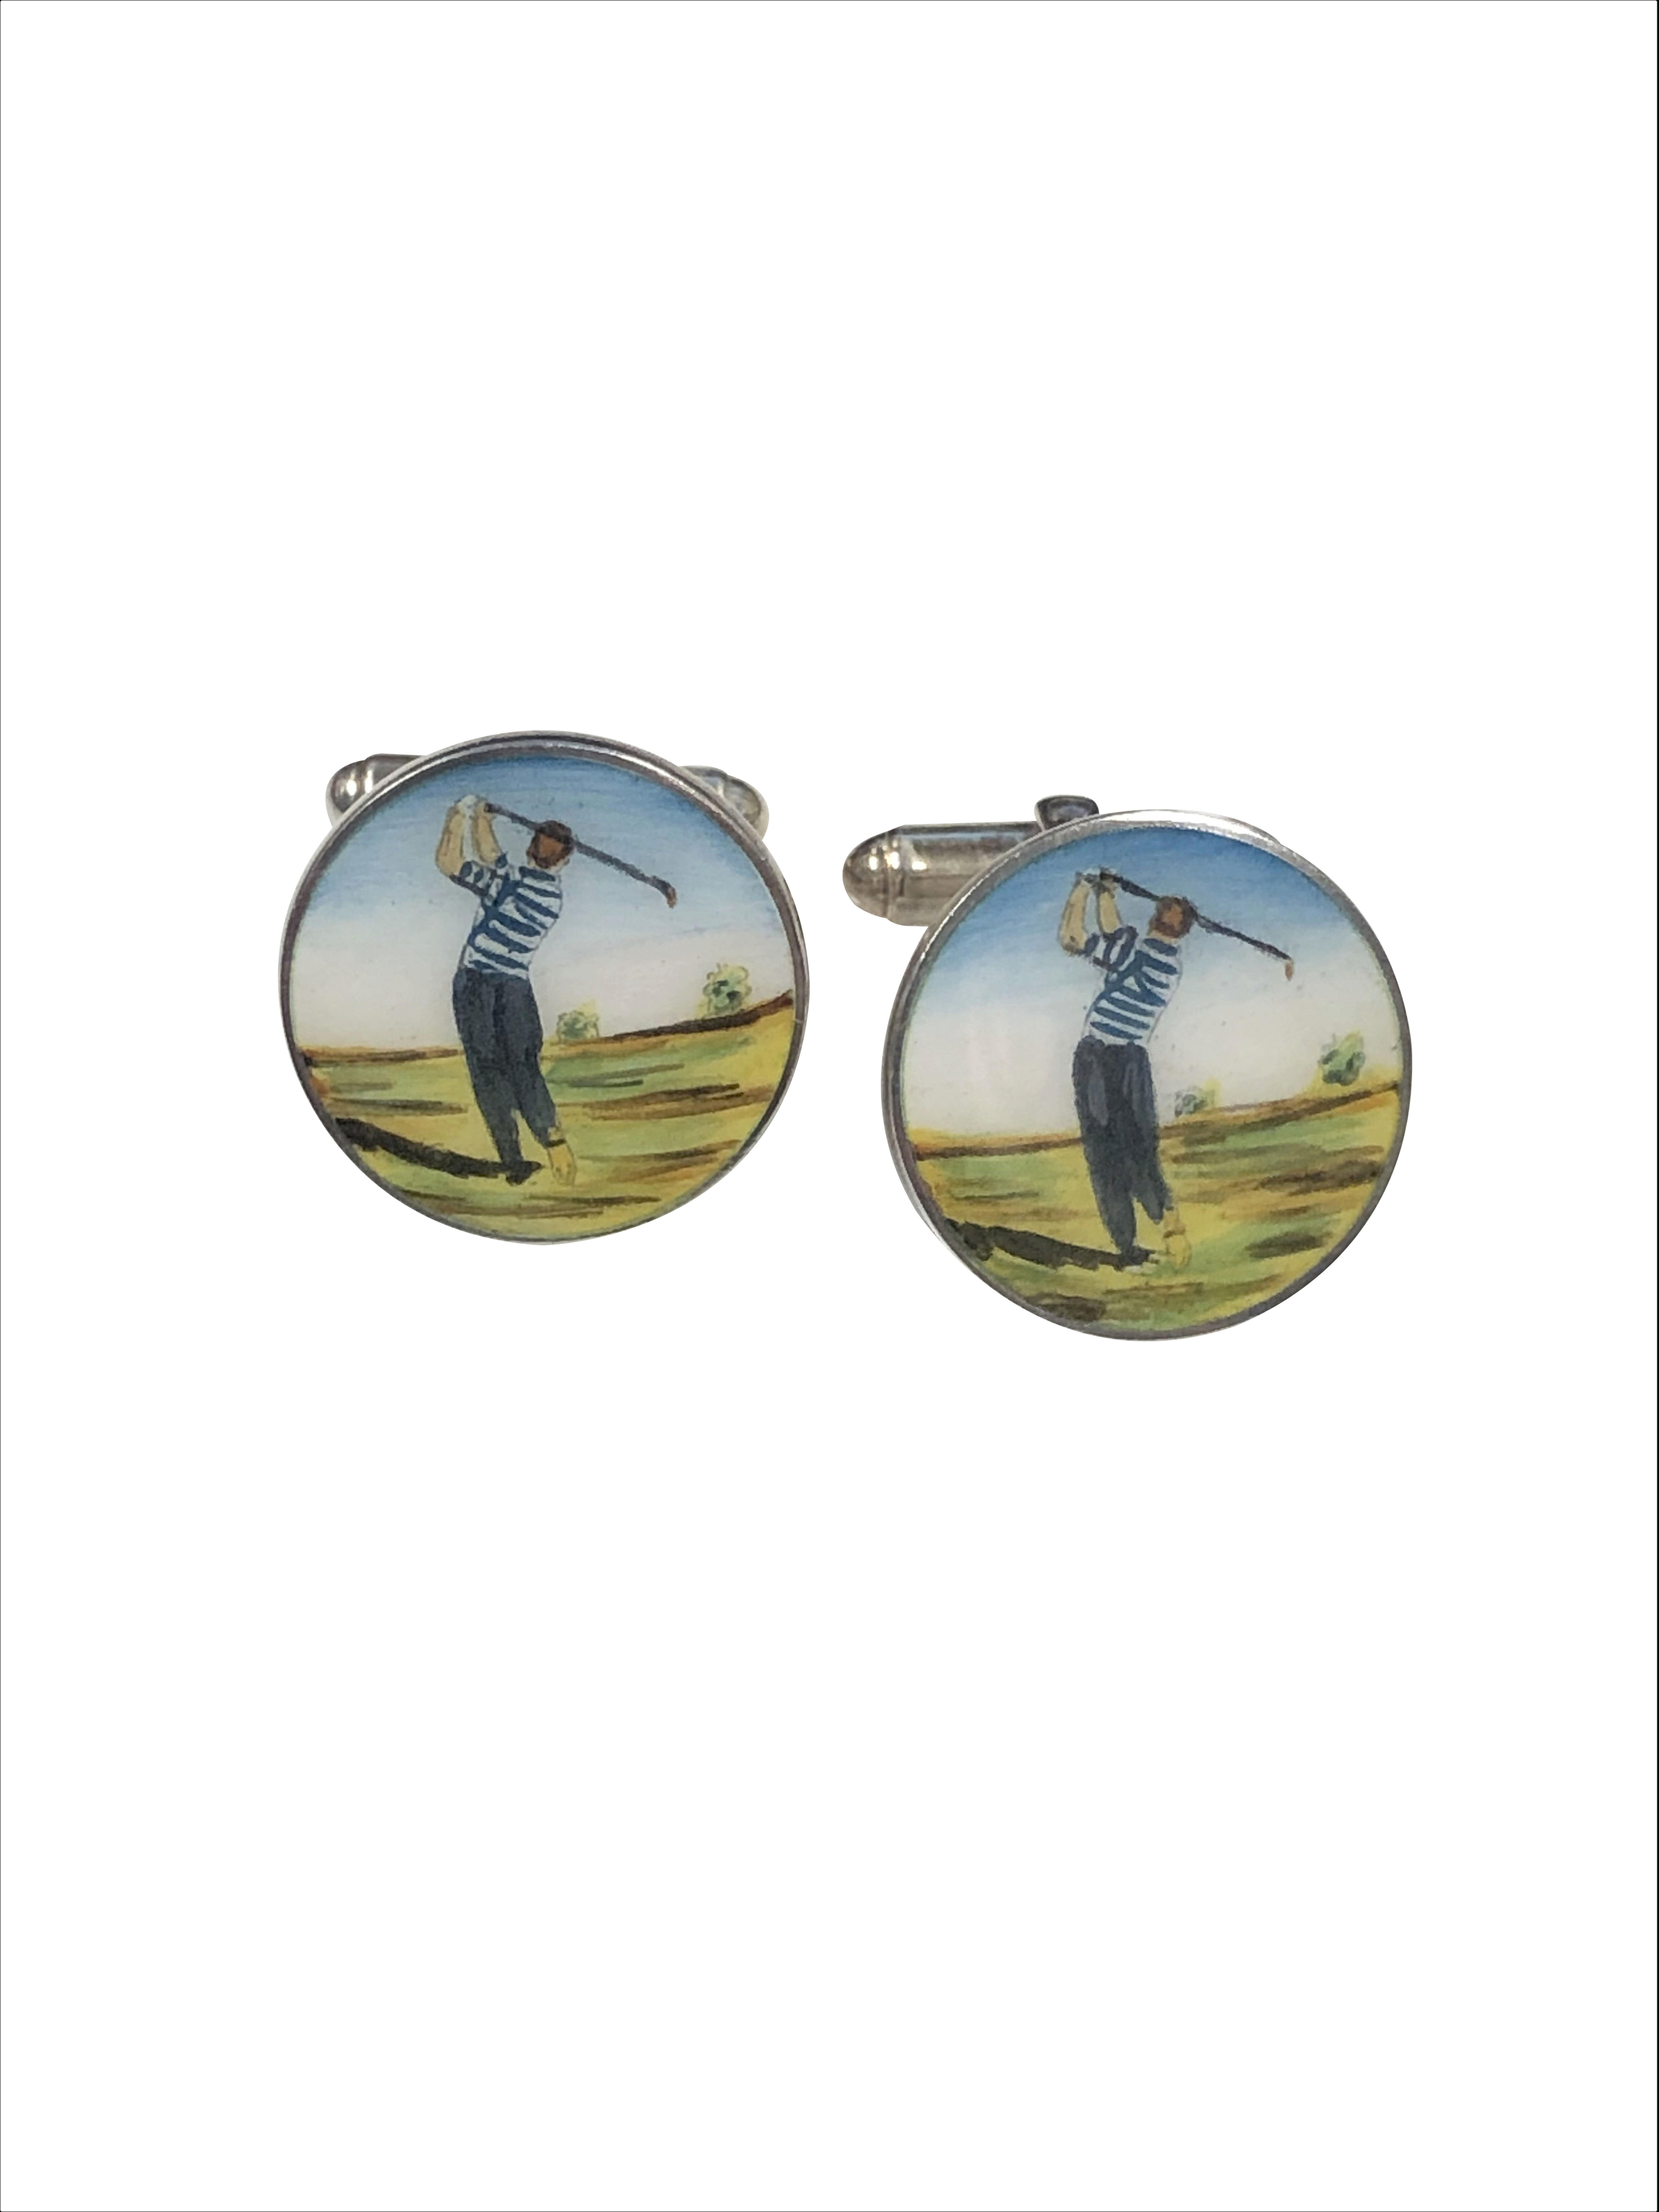 Circa 2005 Tiffany & company Sterling Silver and Enamel Golf Theme Cufflinks, the tops measure 3/4 inch in diameter and feature a hand painted hard fired Enamel scene of a Golfer. Having toggle backs for easy on and off. Excellent near unworn